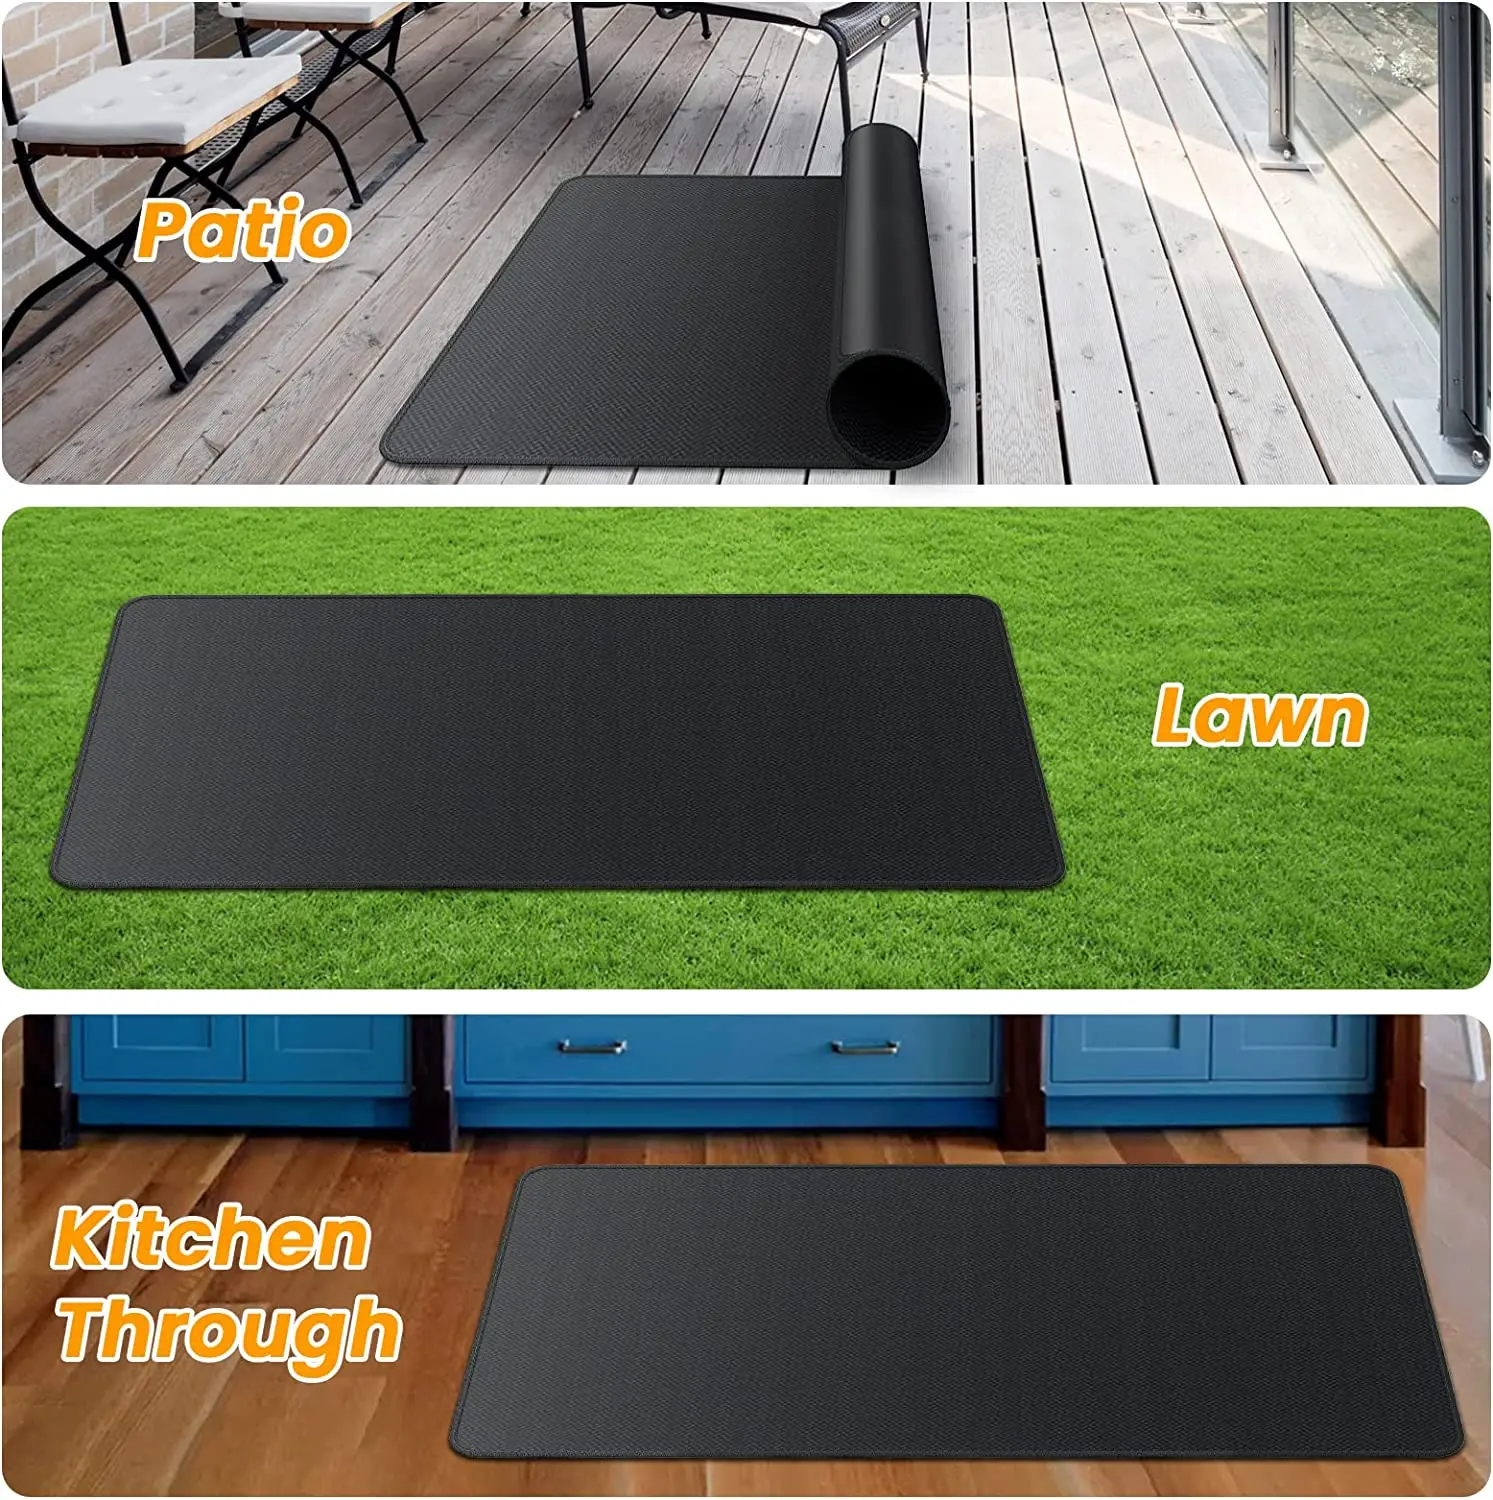 500gsm Heavy duty silicone coated fiberglass fire-rpoof grill mats for outdoor grill deck protector